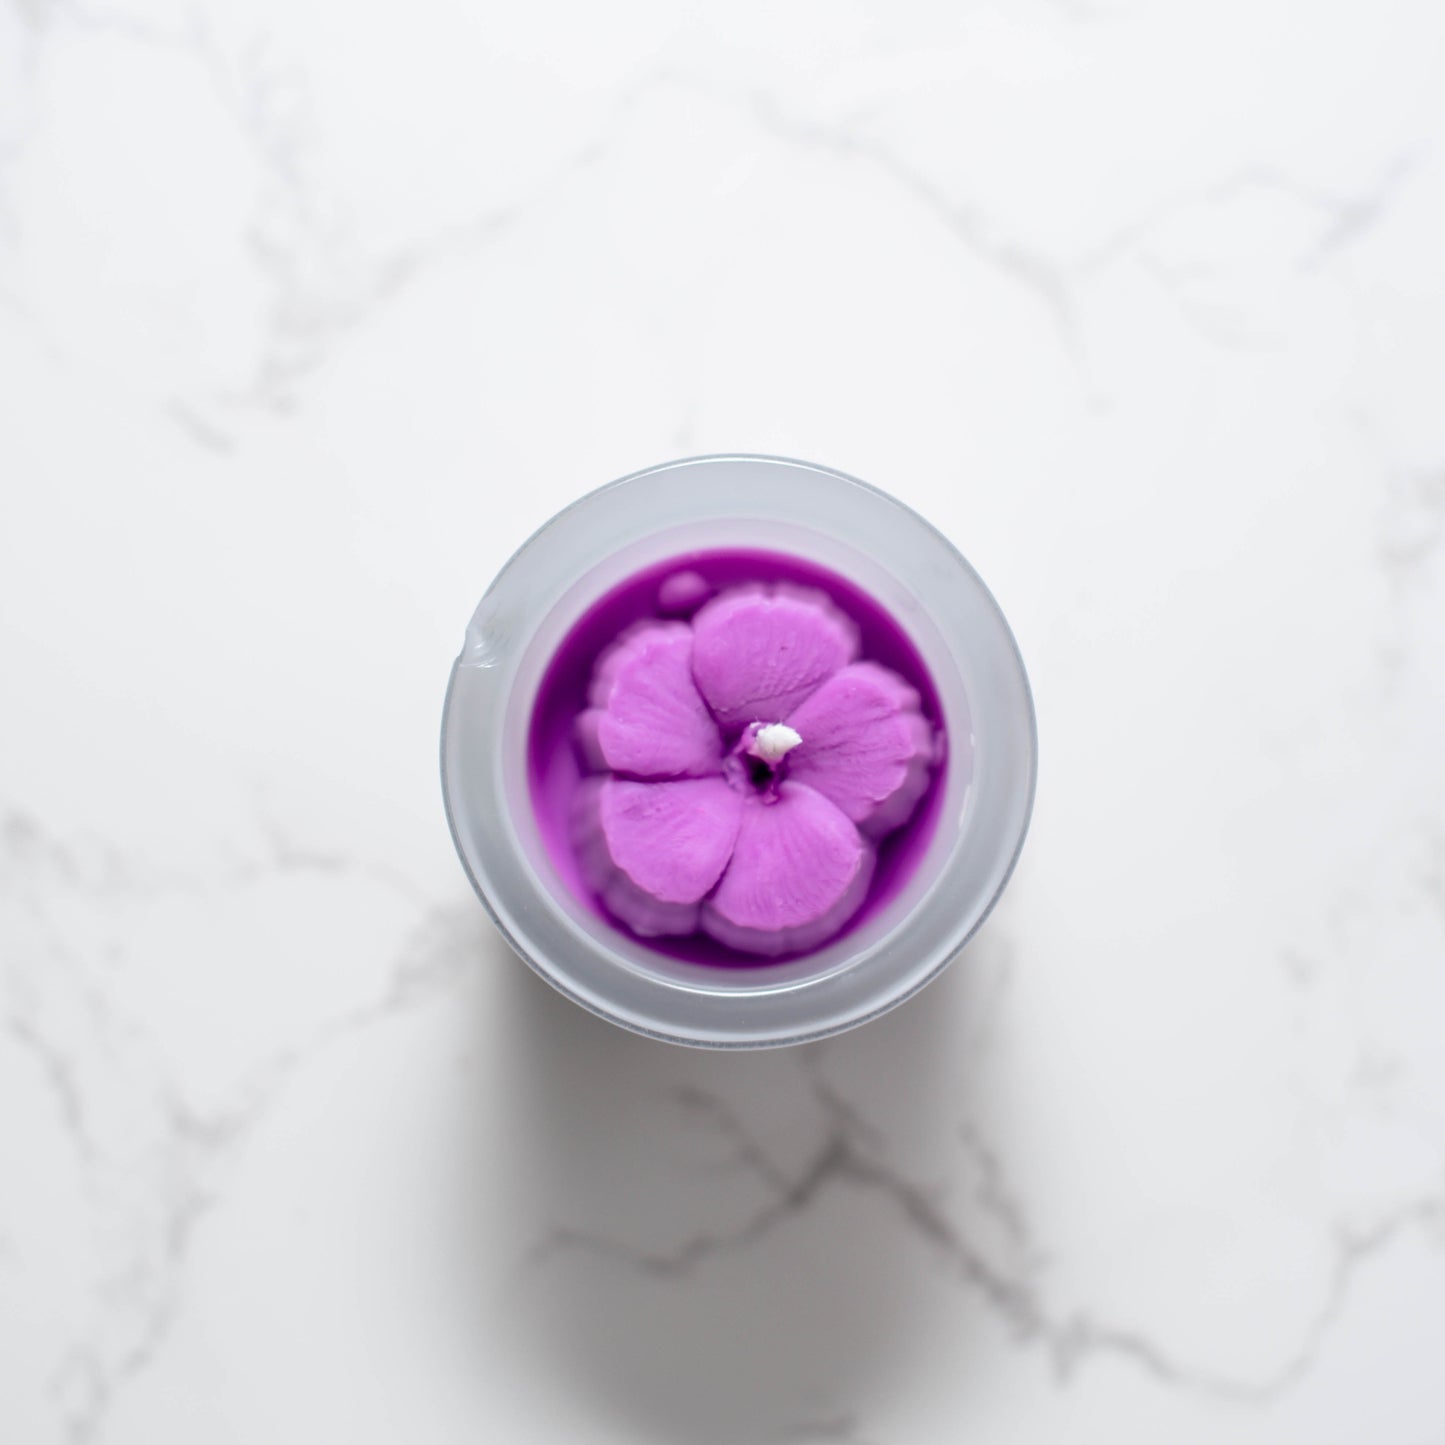 Hibiscus Flower Candle